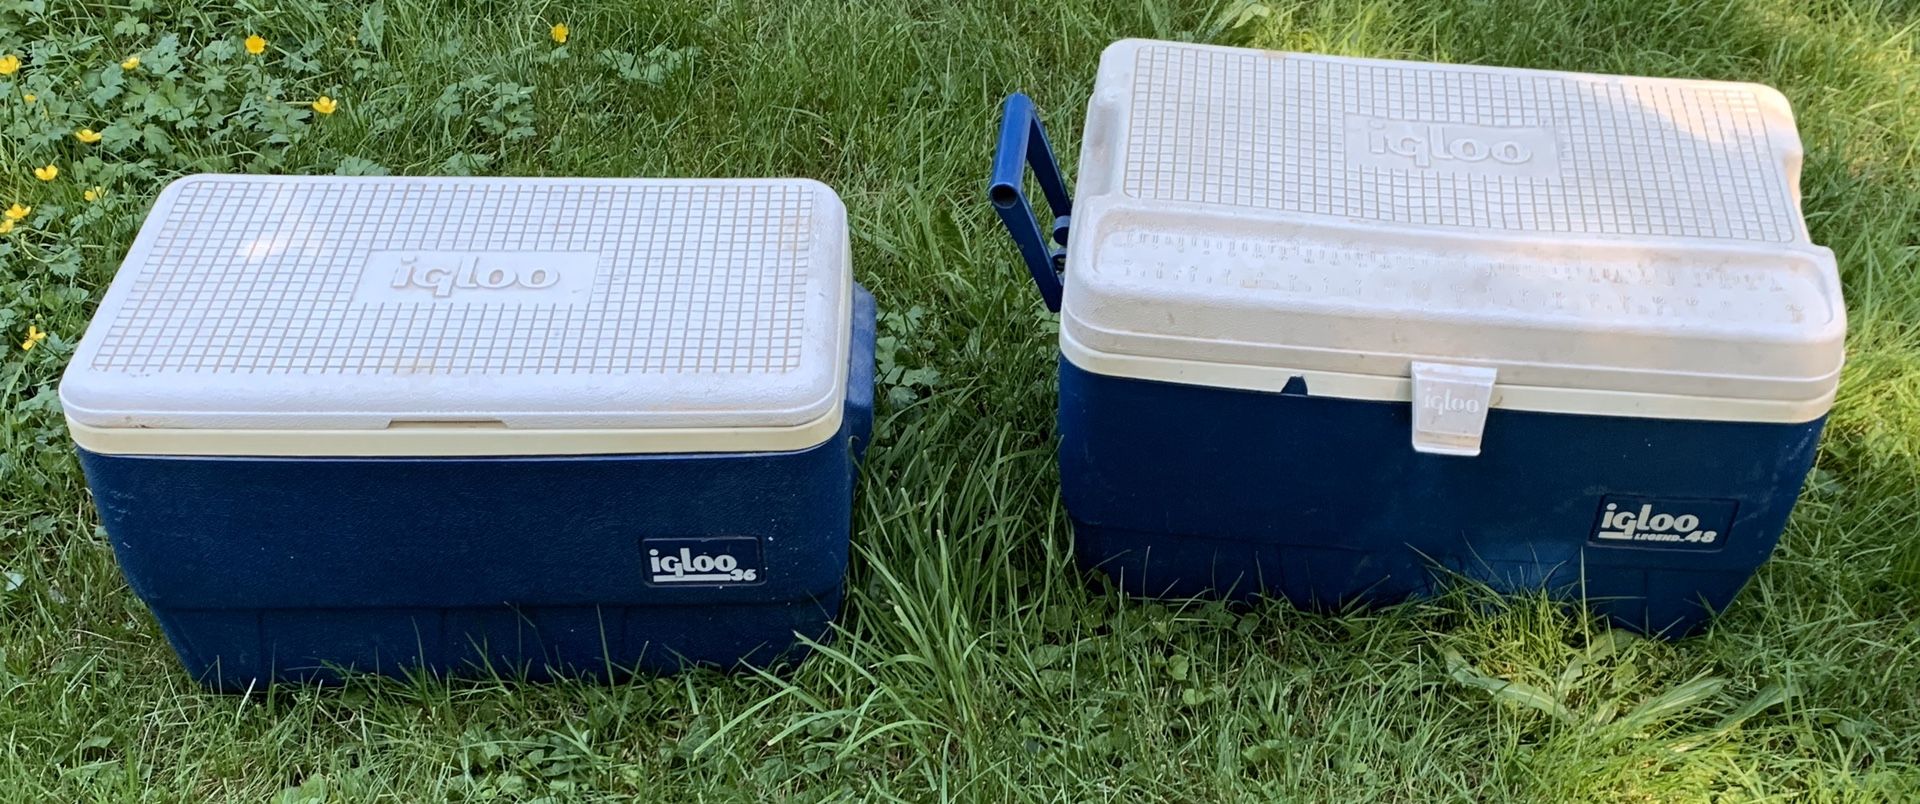 2 iGloo coolers for 1 price